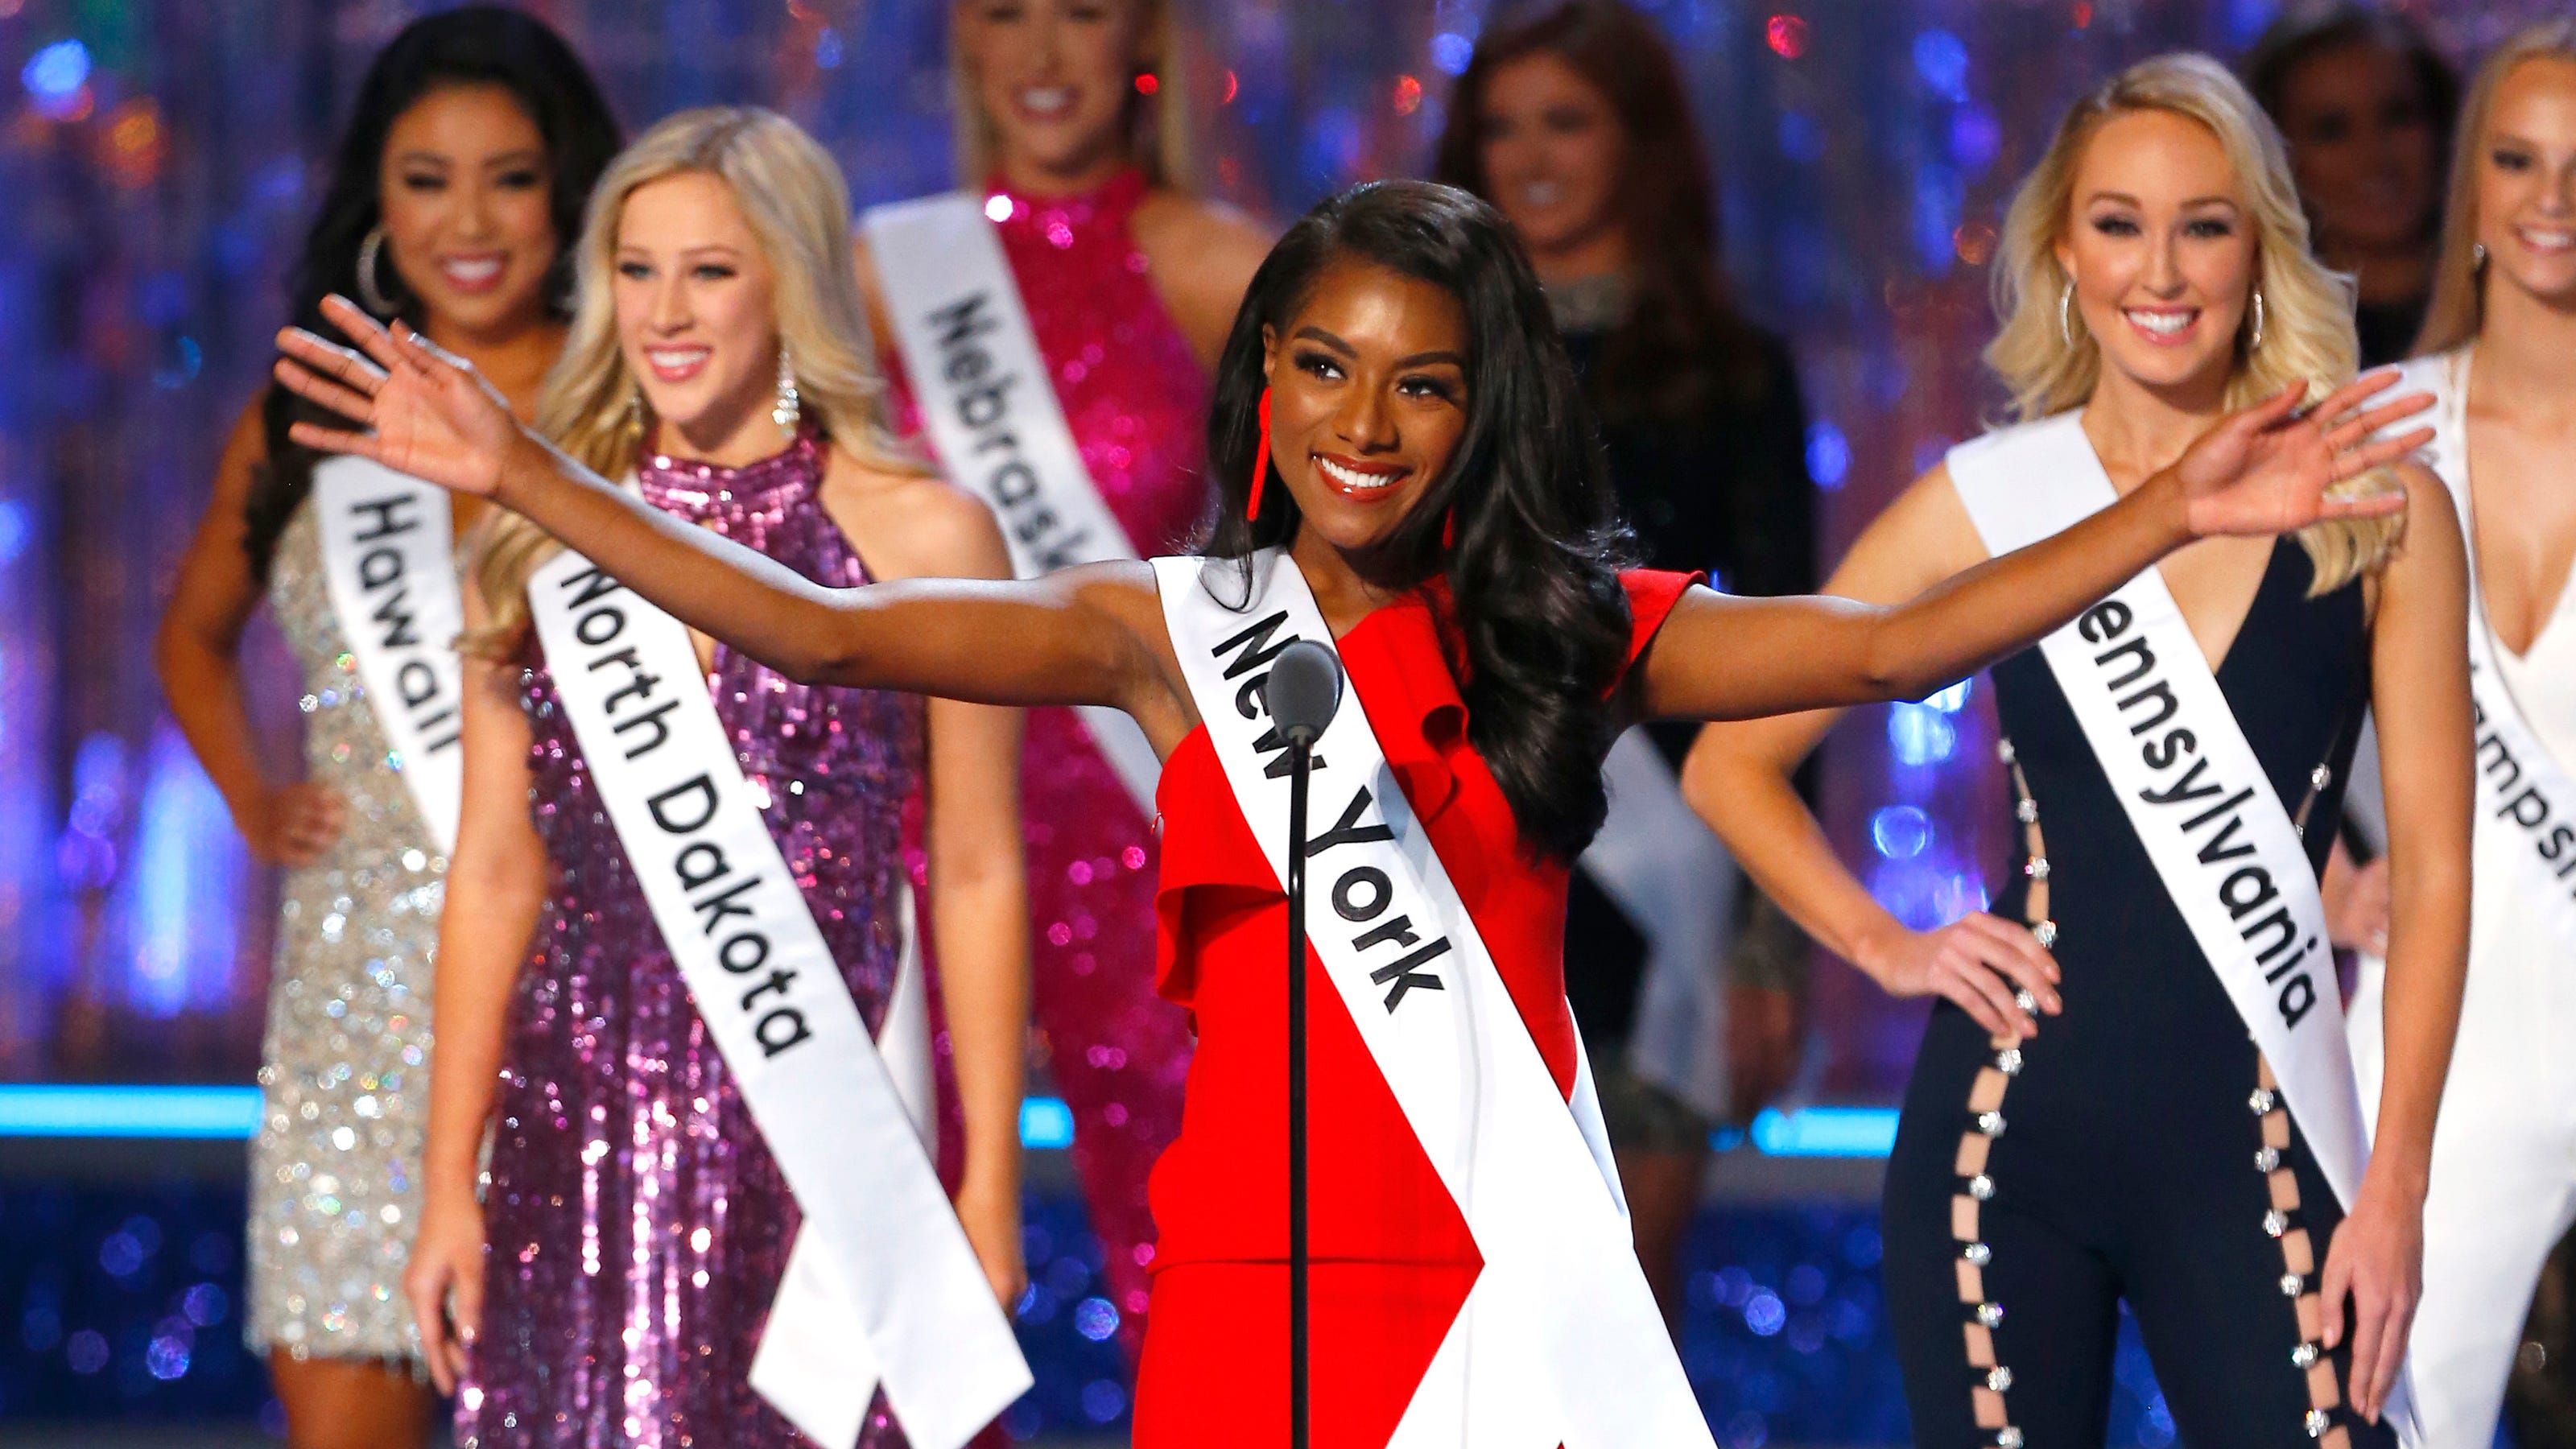 Miss America 2019 Twitter calls revised pageant a 'trainwreck'